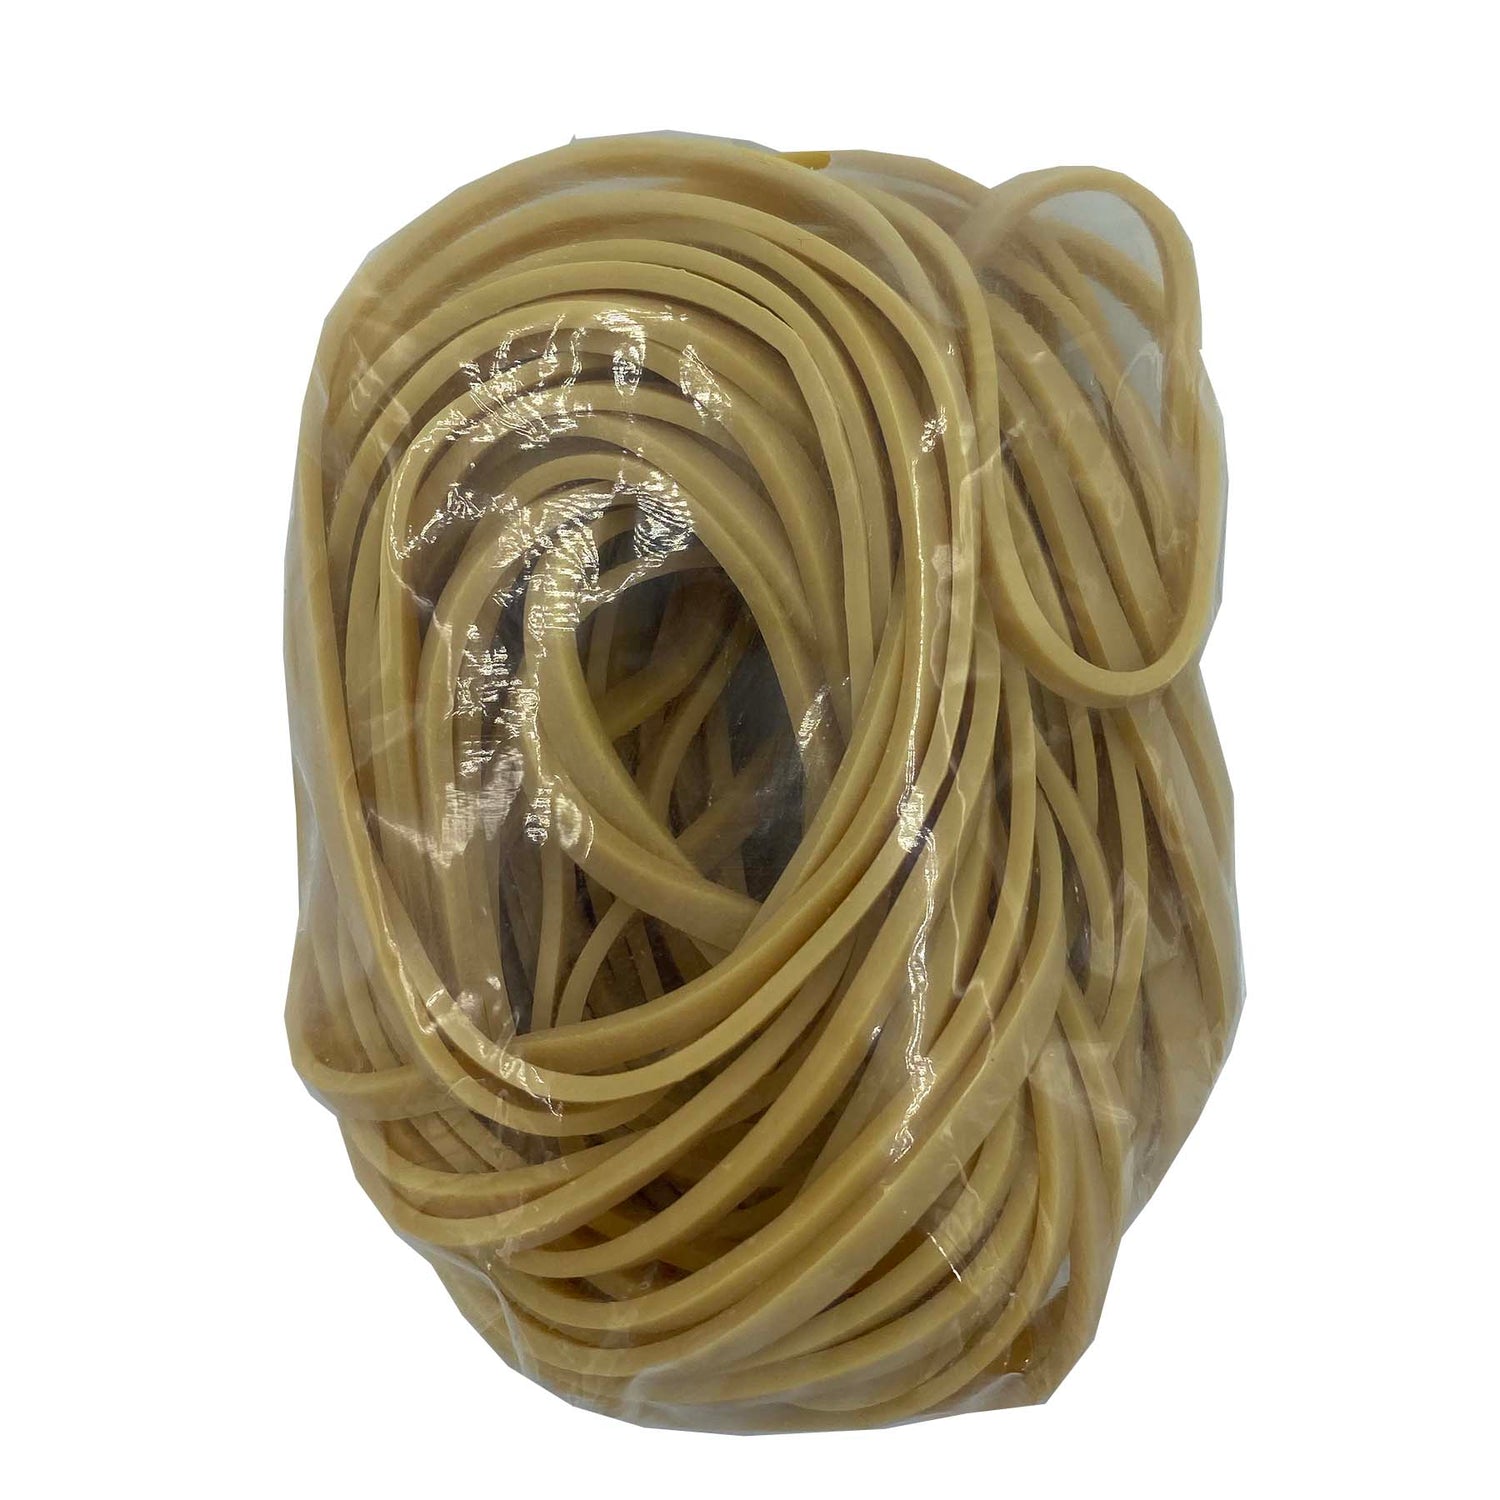 Fishing Station Rubber Bands-Terminal Tackle-Fishing Station-Large Size 32 (50g)-Fishing Station